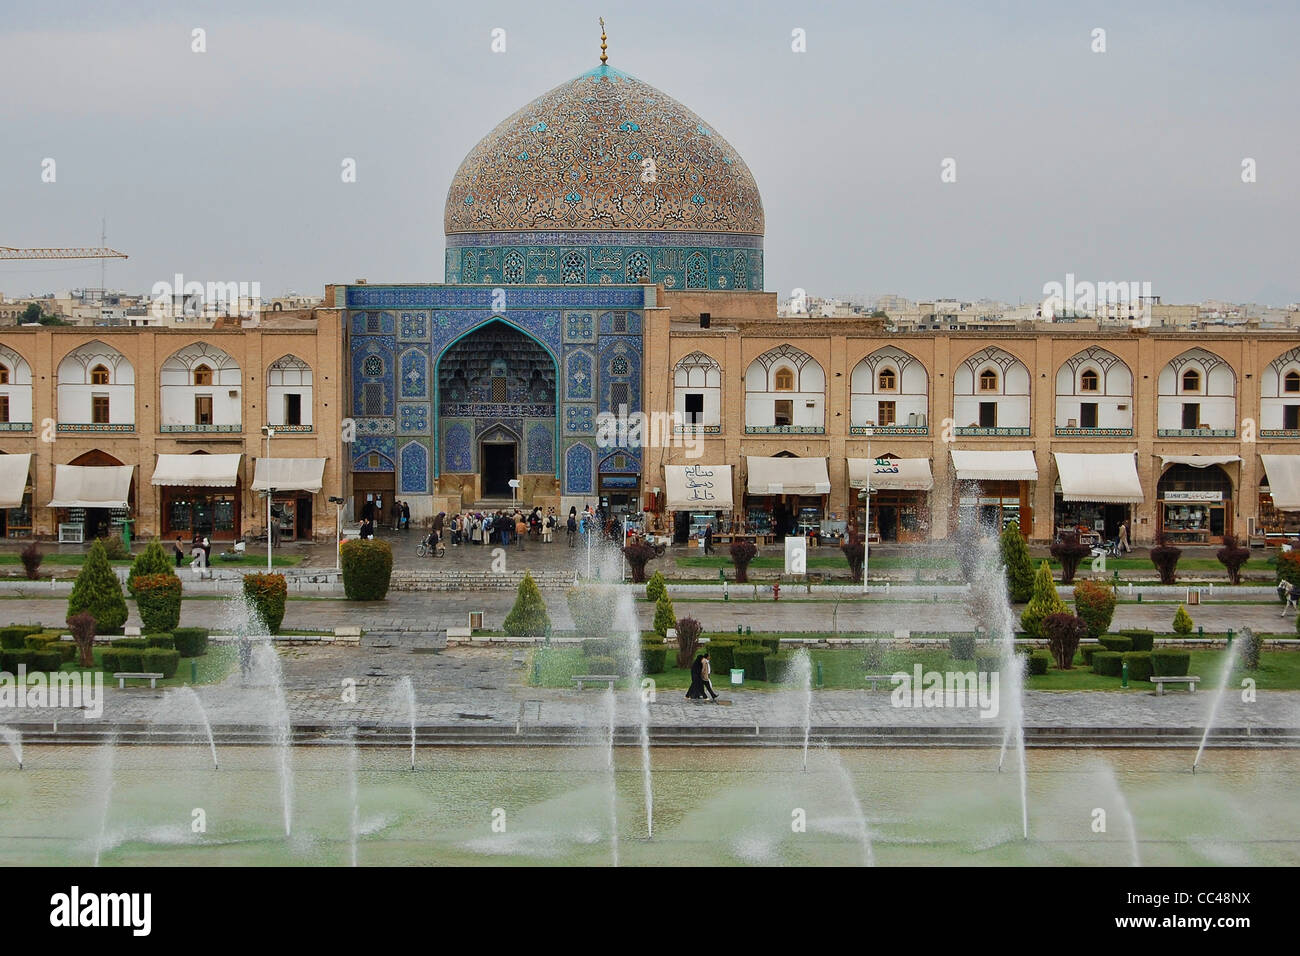 Naqsh-e Jahan Square in Esfahan also known as Imam square. Stock Photo